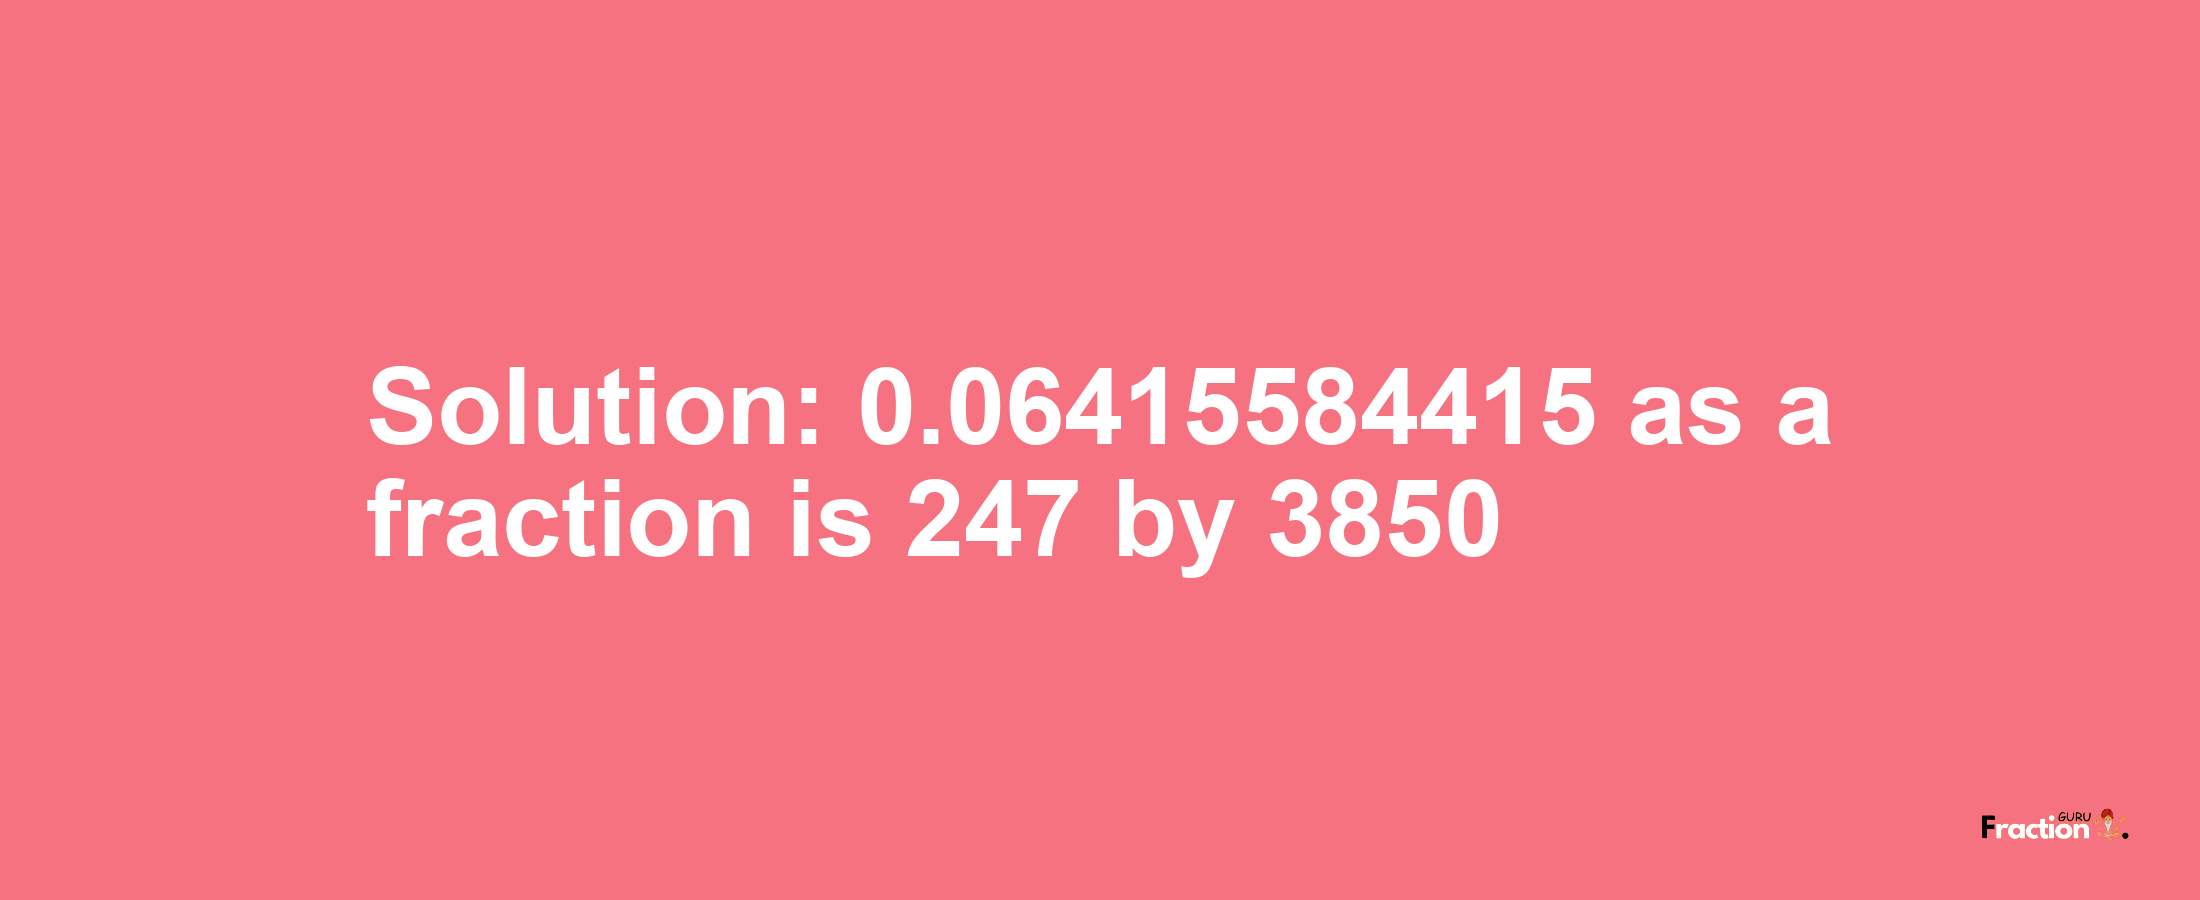 Solution:0.06415584415 as a fraction is 247/3850